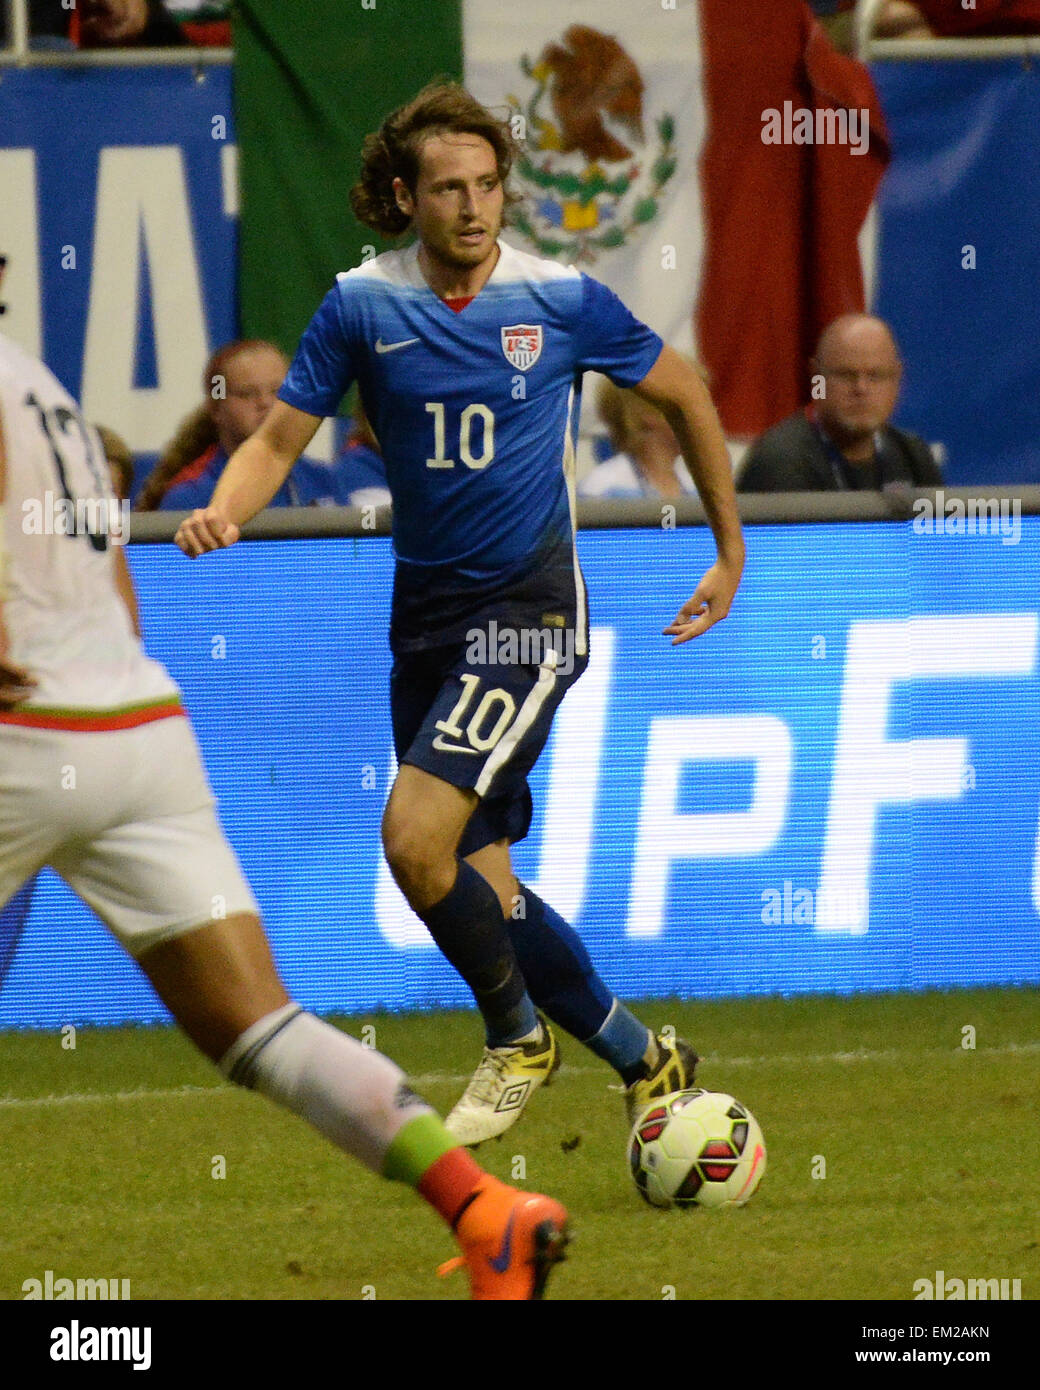 April 15, 2015. Mix Diskerud #10 of the USA Men's Soccer team in action vs Mexico at the Alamodome in an International Friendly in San Antonio Texas. The U.S. defeats Mexico 2 - 0. Stock Photo